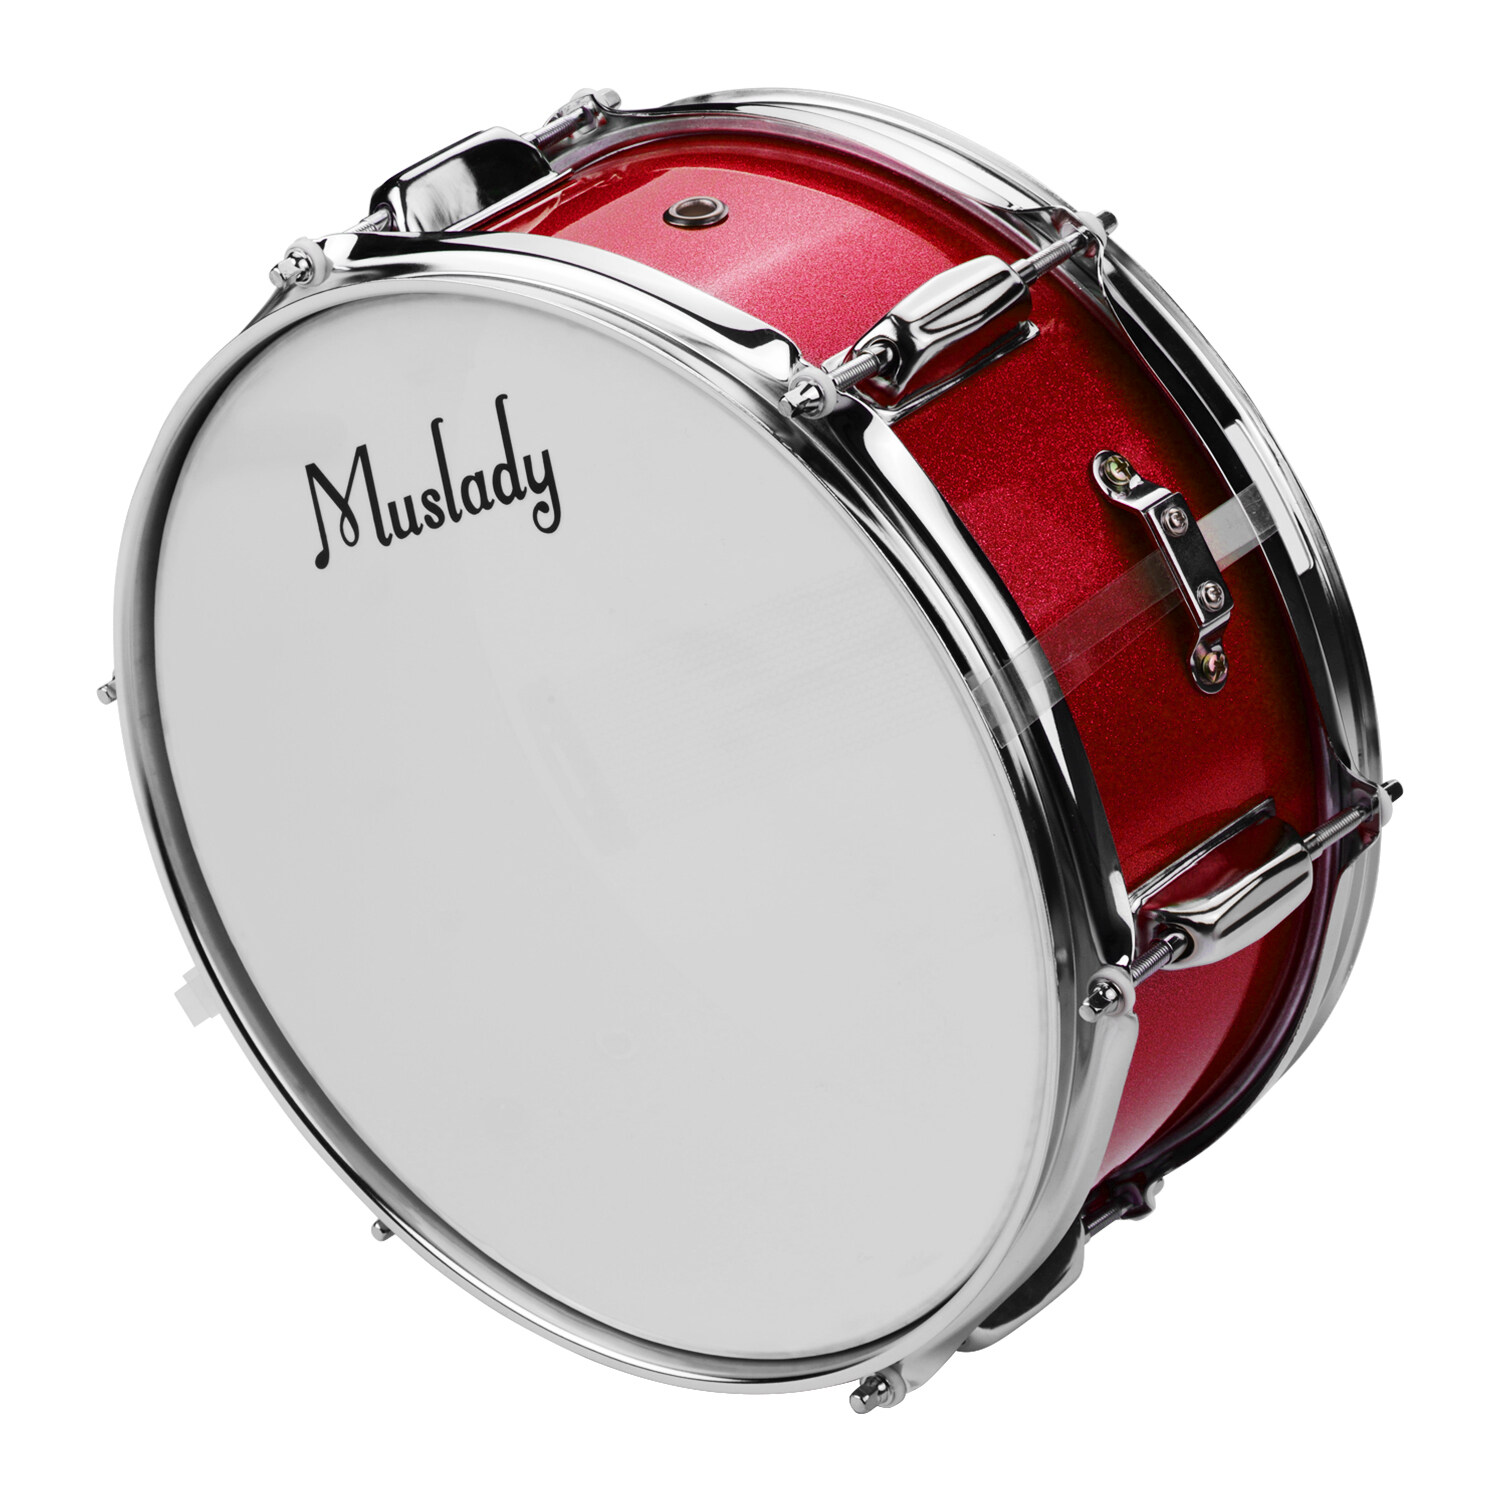 okoogee Muslady 12inch Snare Drum Head with Drumsticks Shoulder Strap Drum Key for Student Band